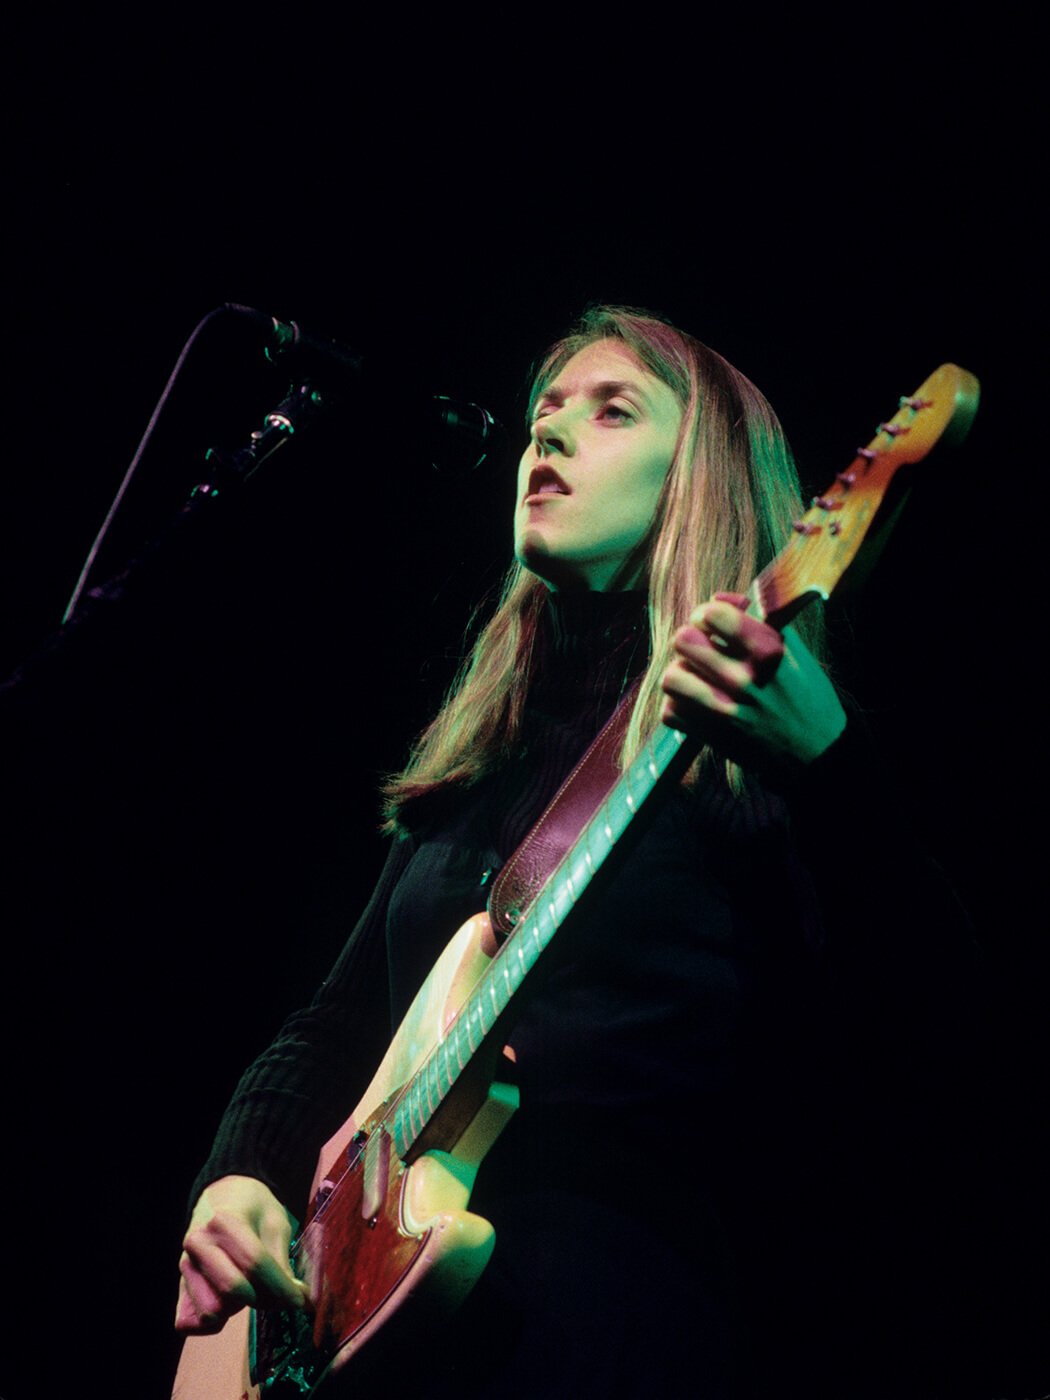 Liz Phair performing in New York City in 1994 by Ebet Roberts/Redferns via Getty Images